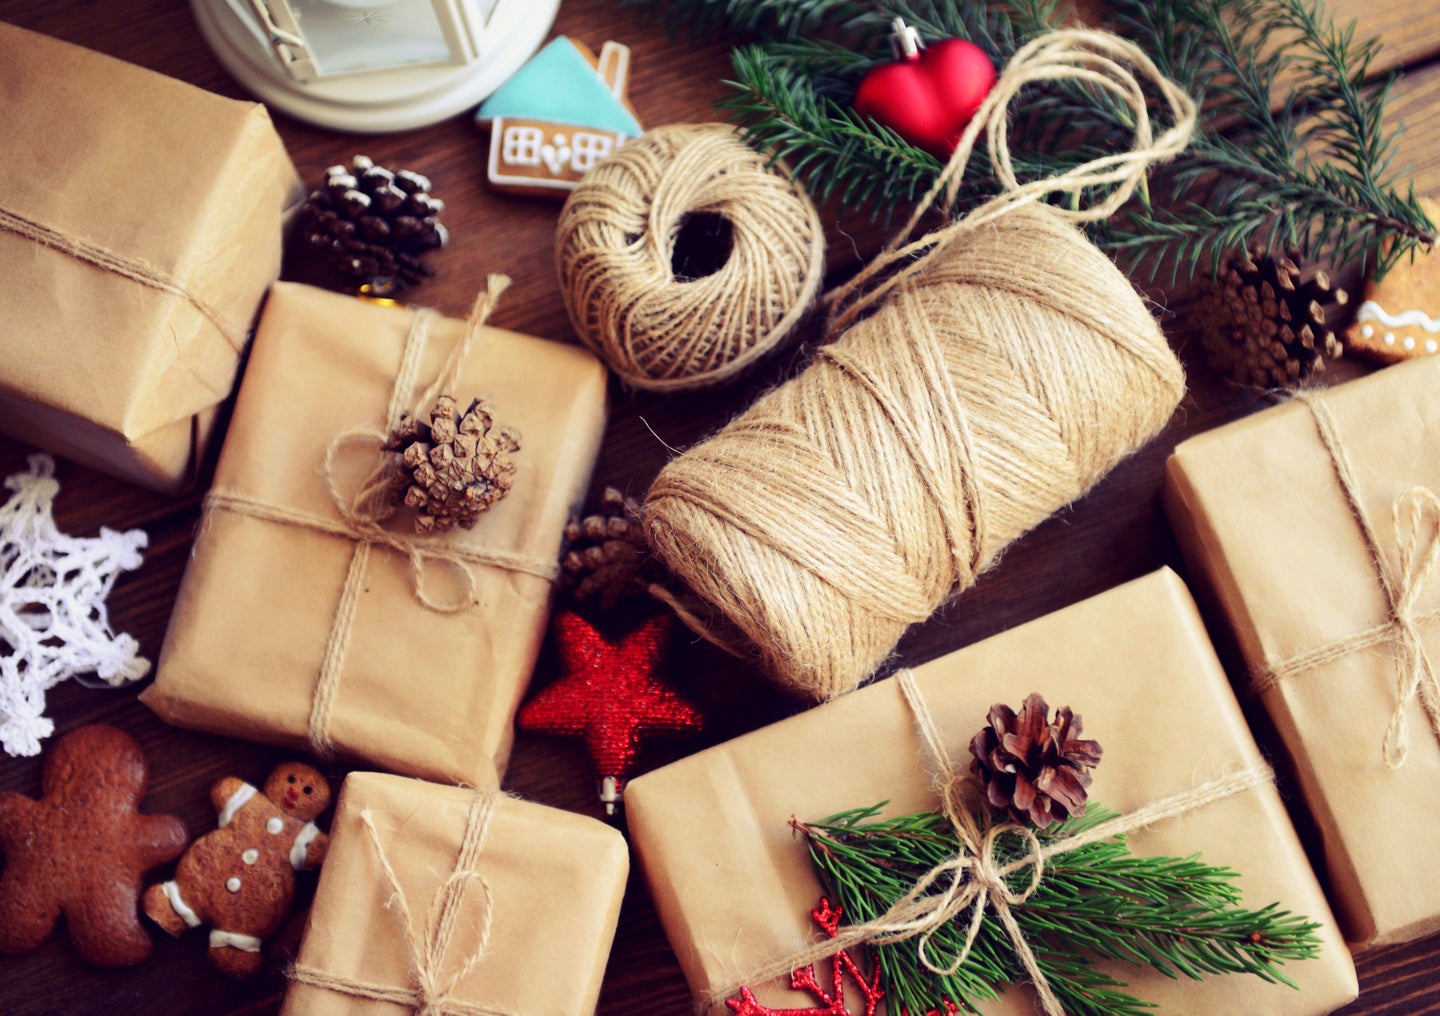 5 Things We Spend Too Much Money on Over the Holidays (and How to Save)